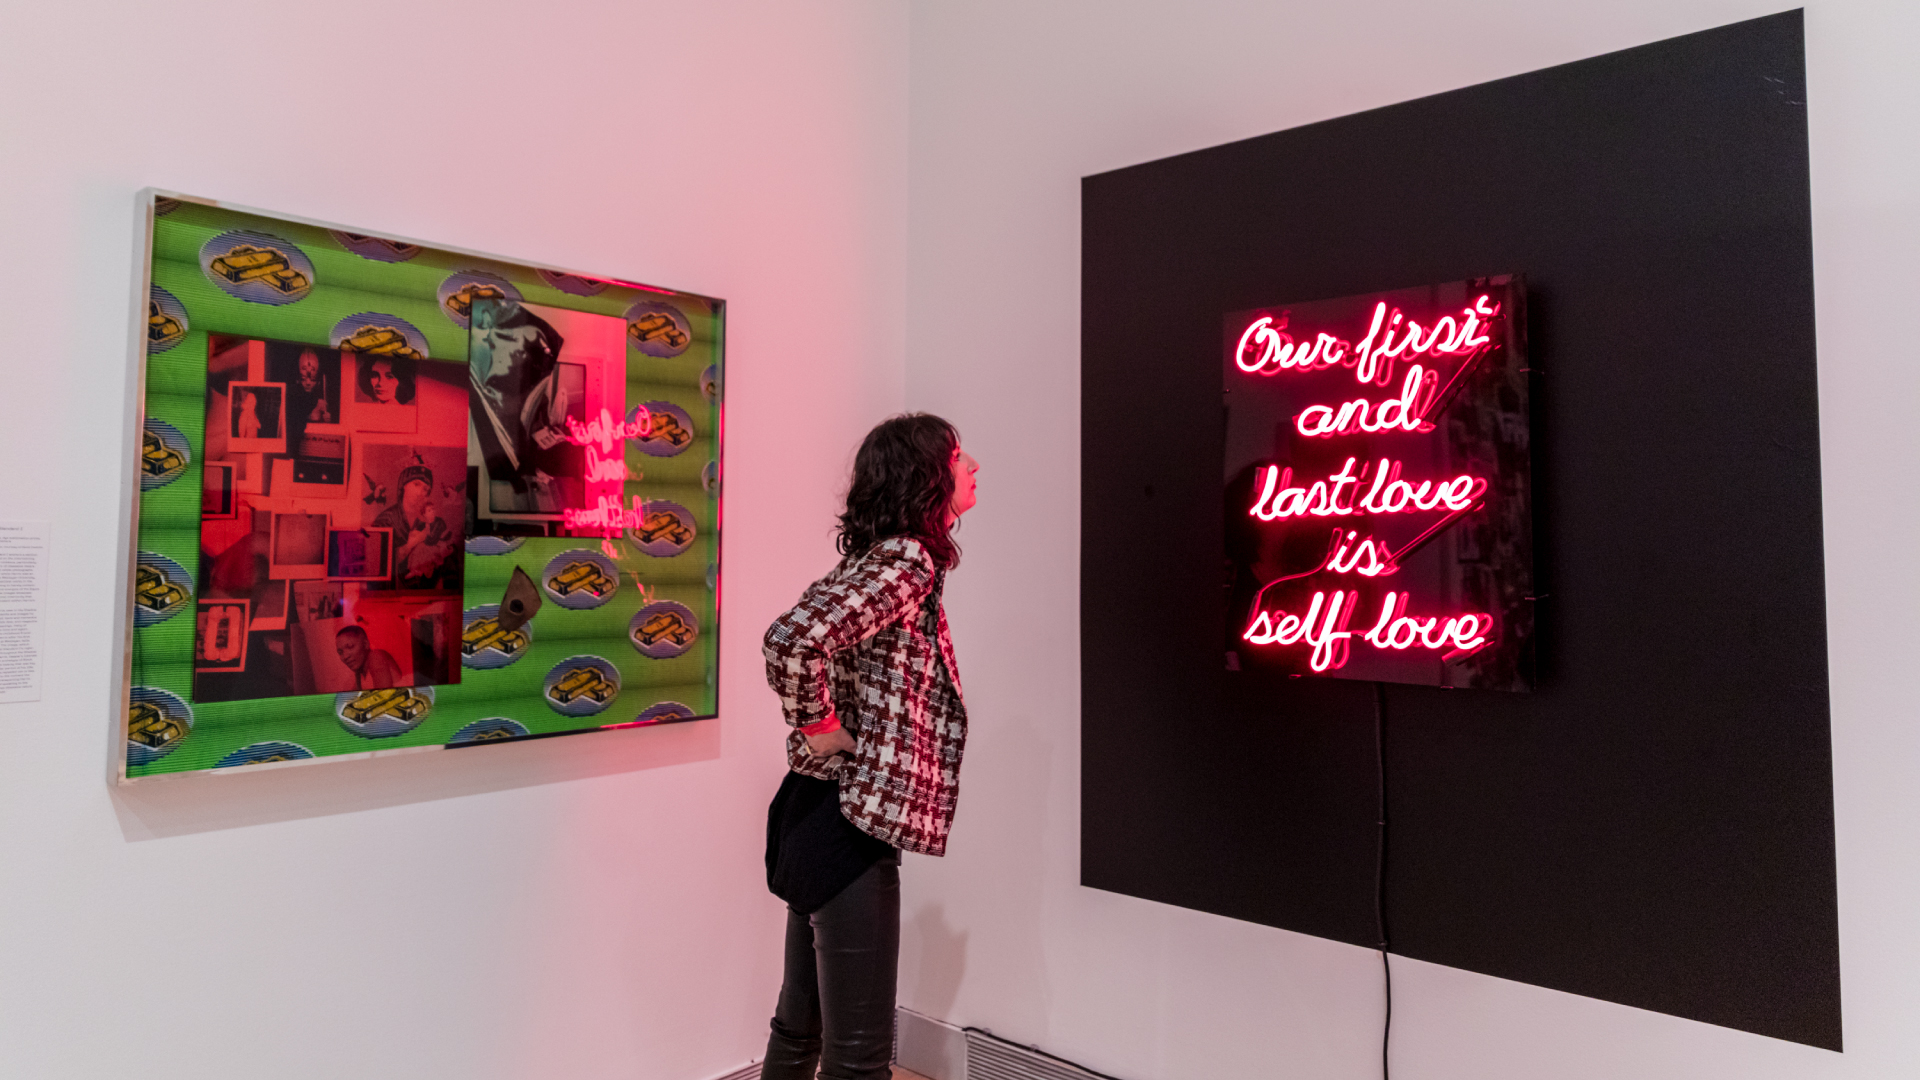 Installation view of "Our first and last love."